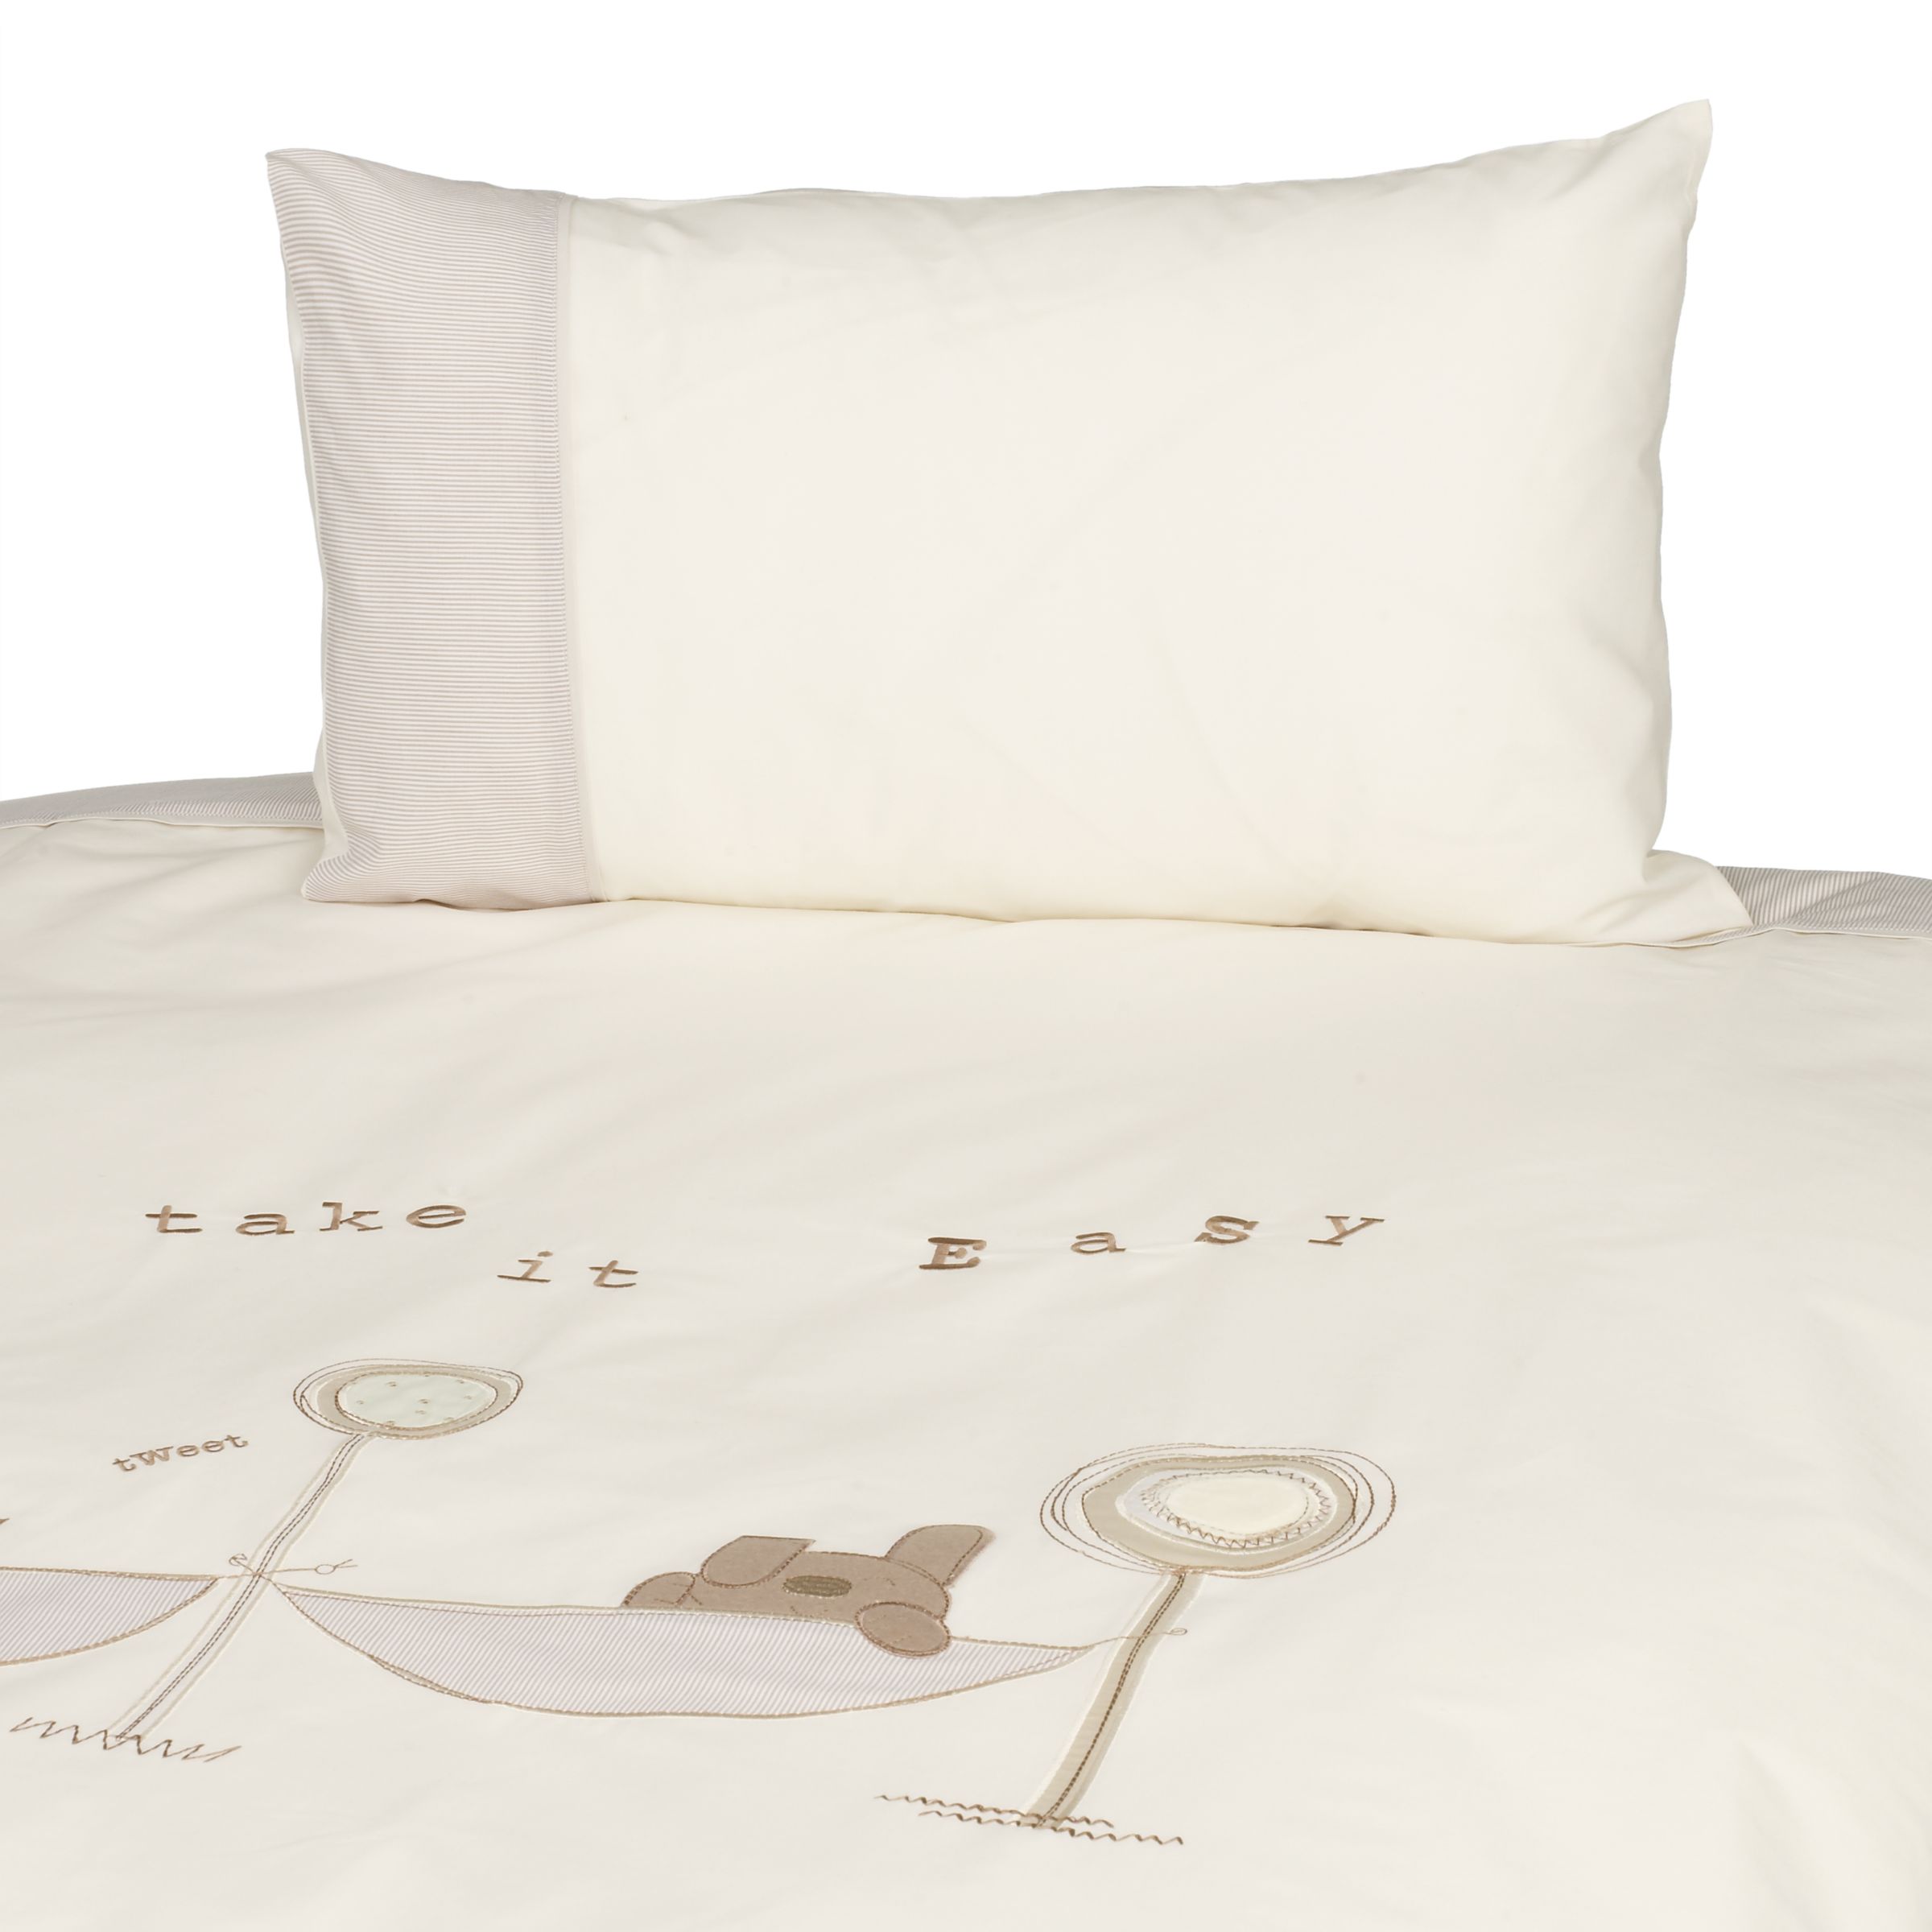 Take It Easy Duvet Cover and Pillow